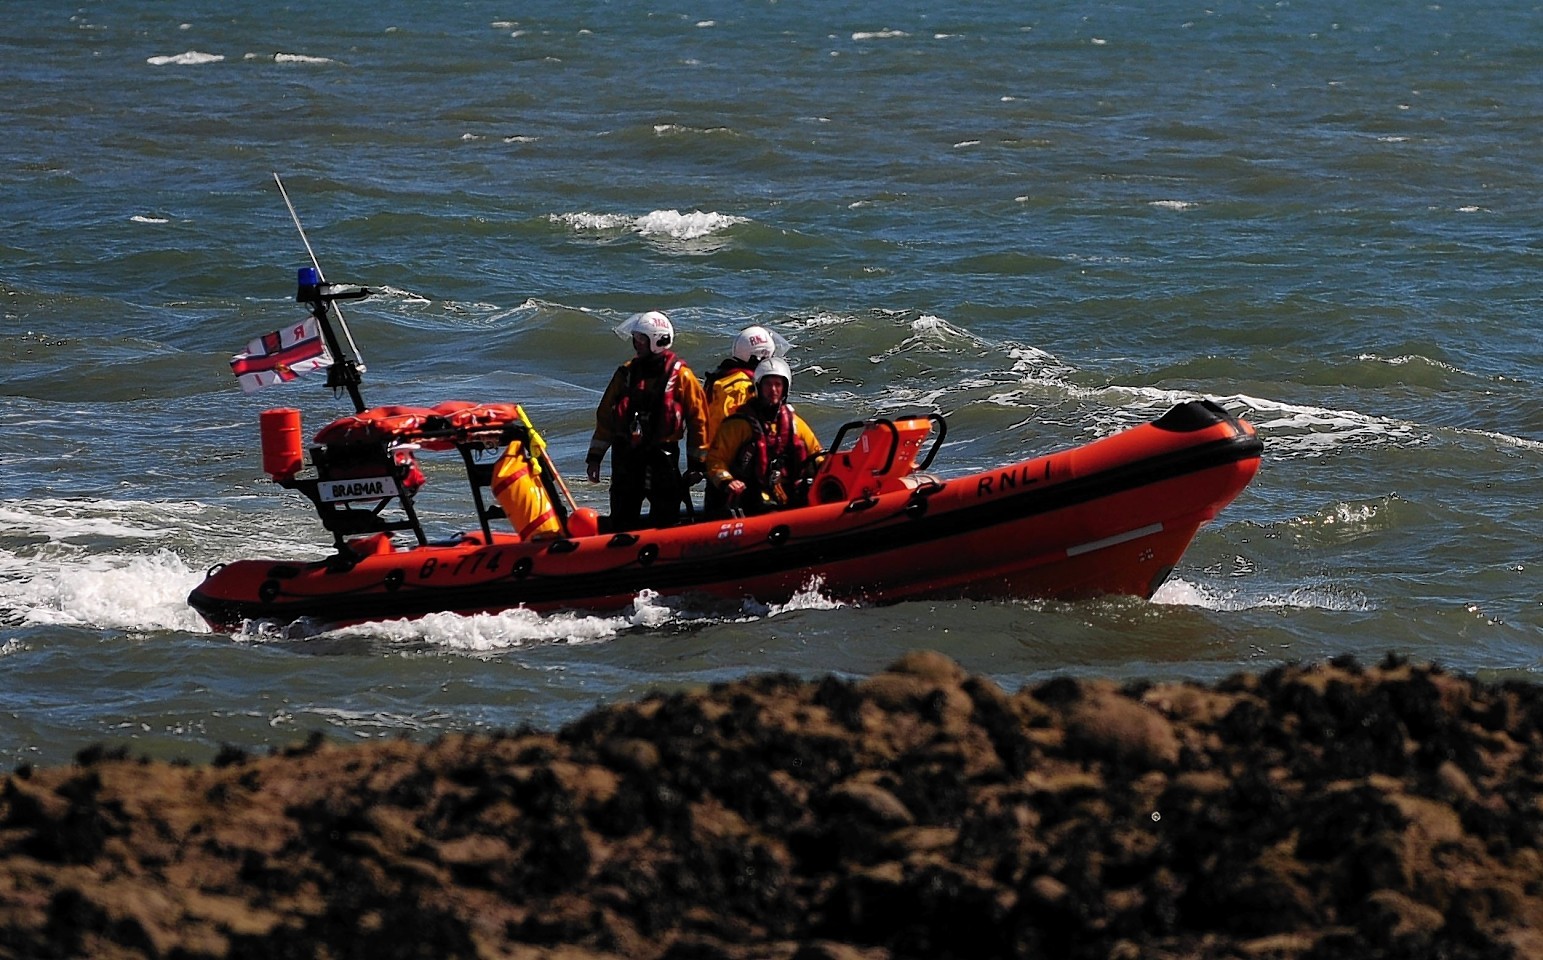 An RNLI lifeboat as the search continues on the east coast of north sea near Gourdon, Aberdeenshire